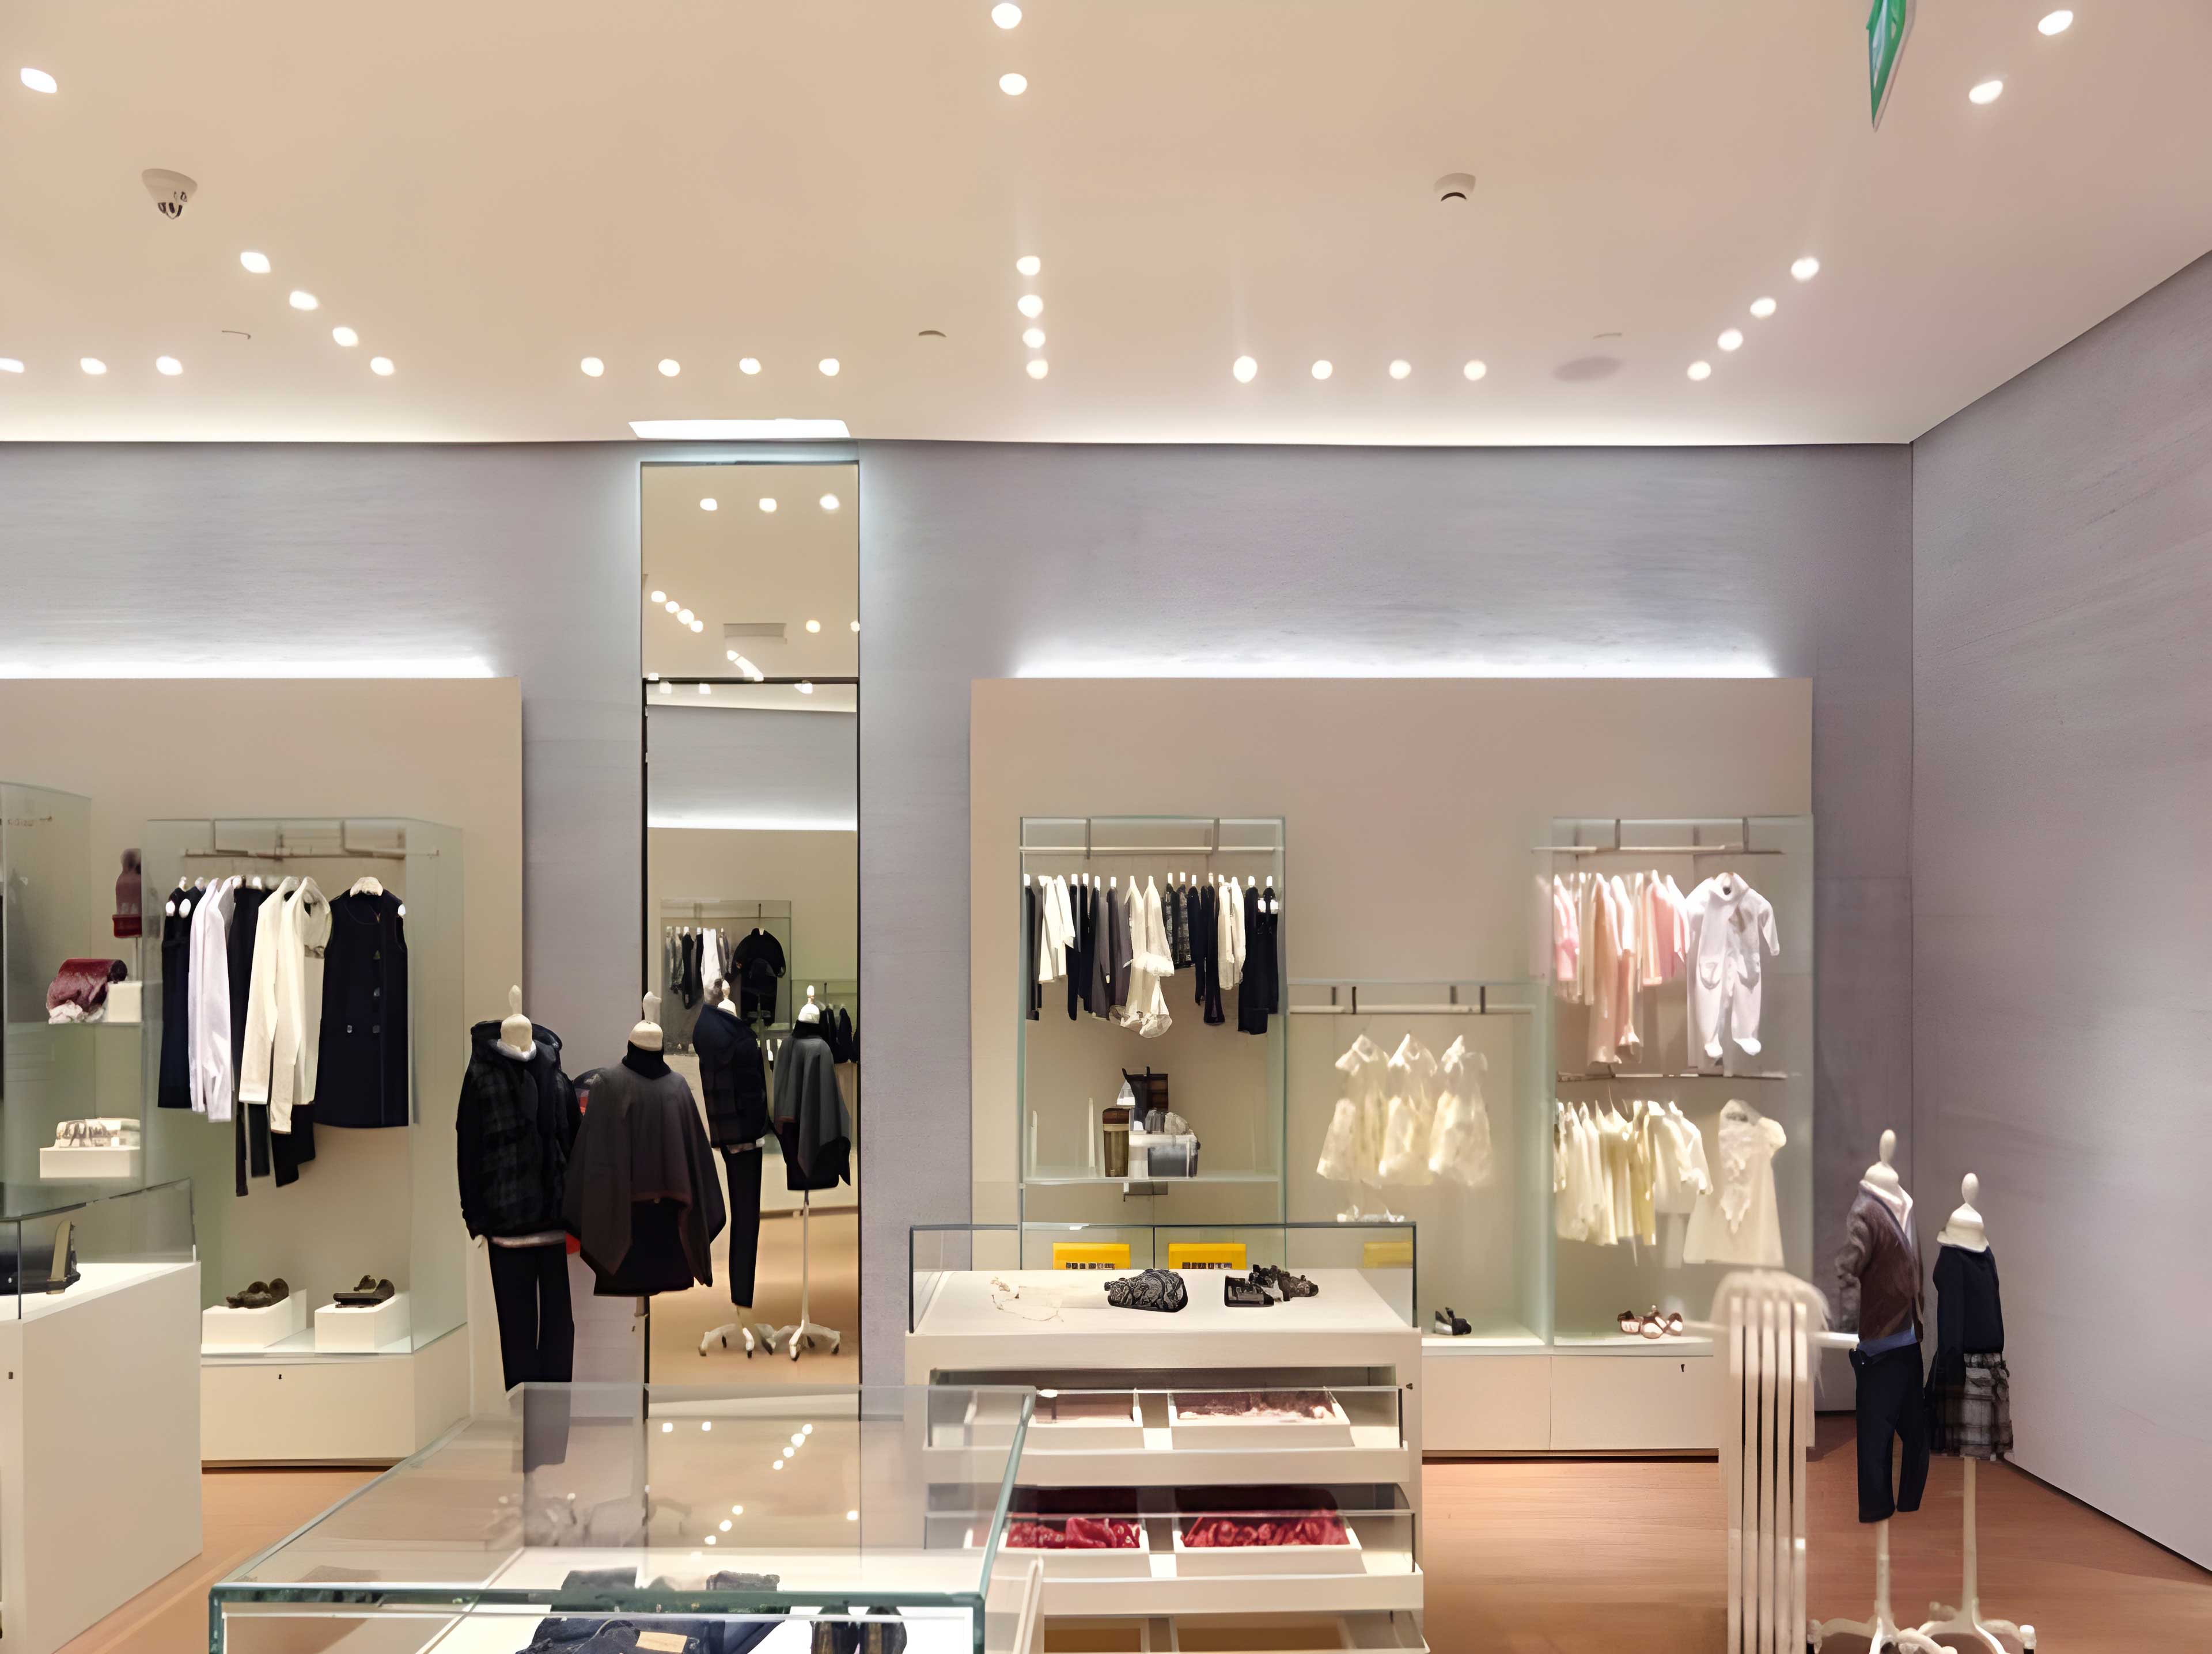 An interesting example presented by Vishal Kapoor to reinforce the value of well designed lighting for enhanced customer experience in the store.  